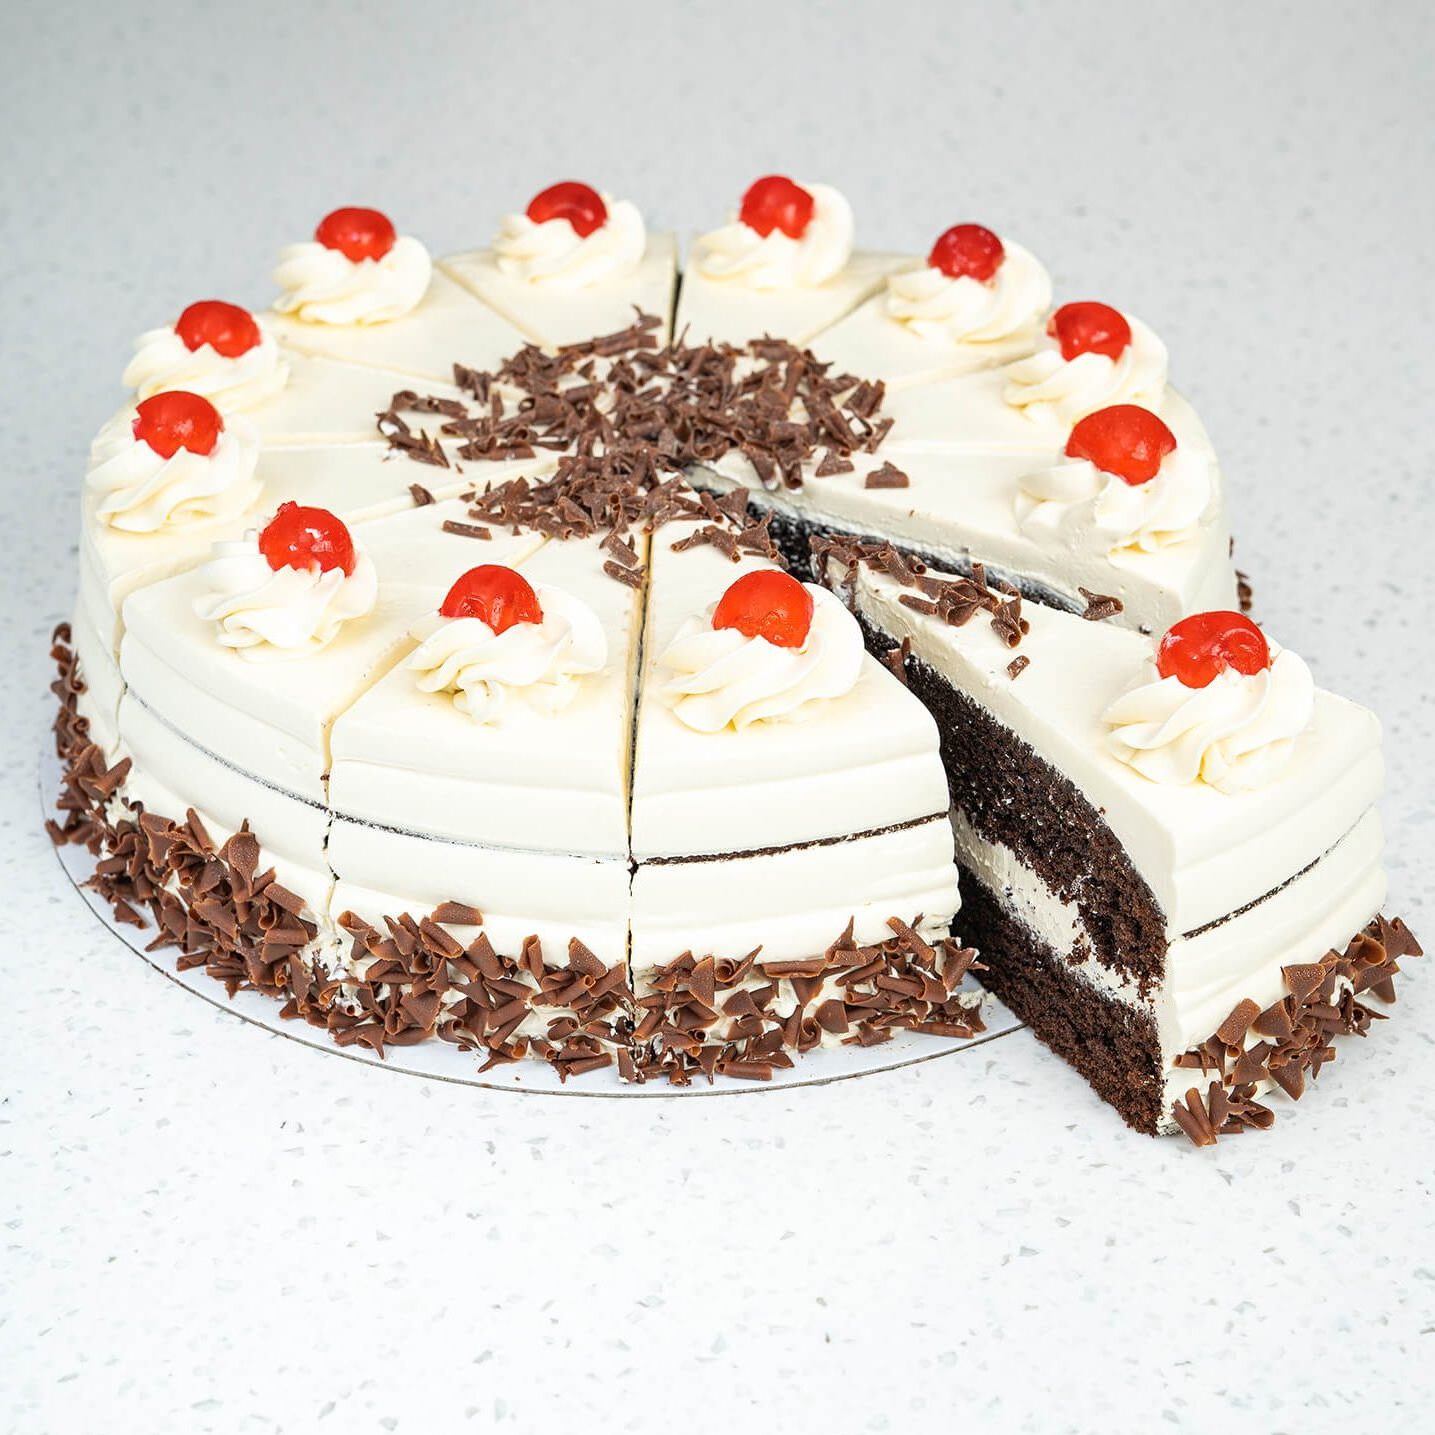 Wholesale Cakes For Coffee Shops | Buy In Bulk | Shop Online